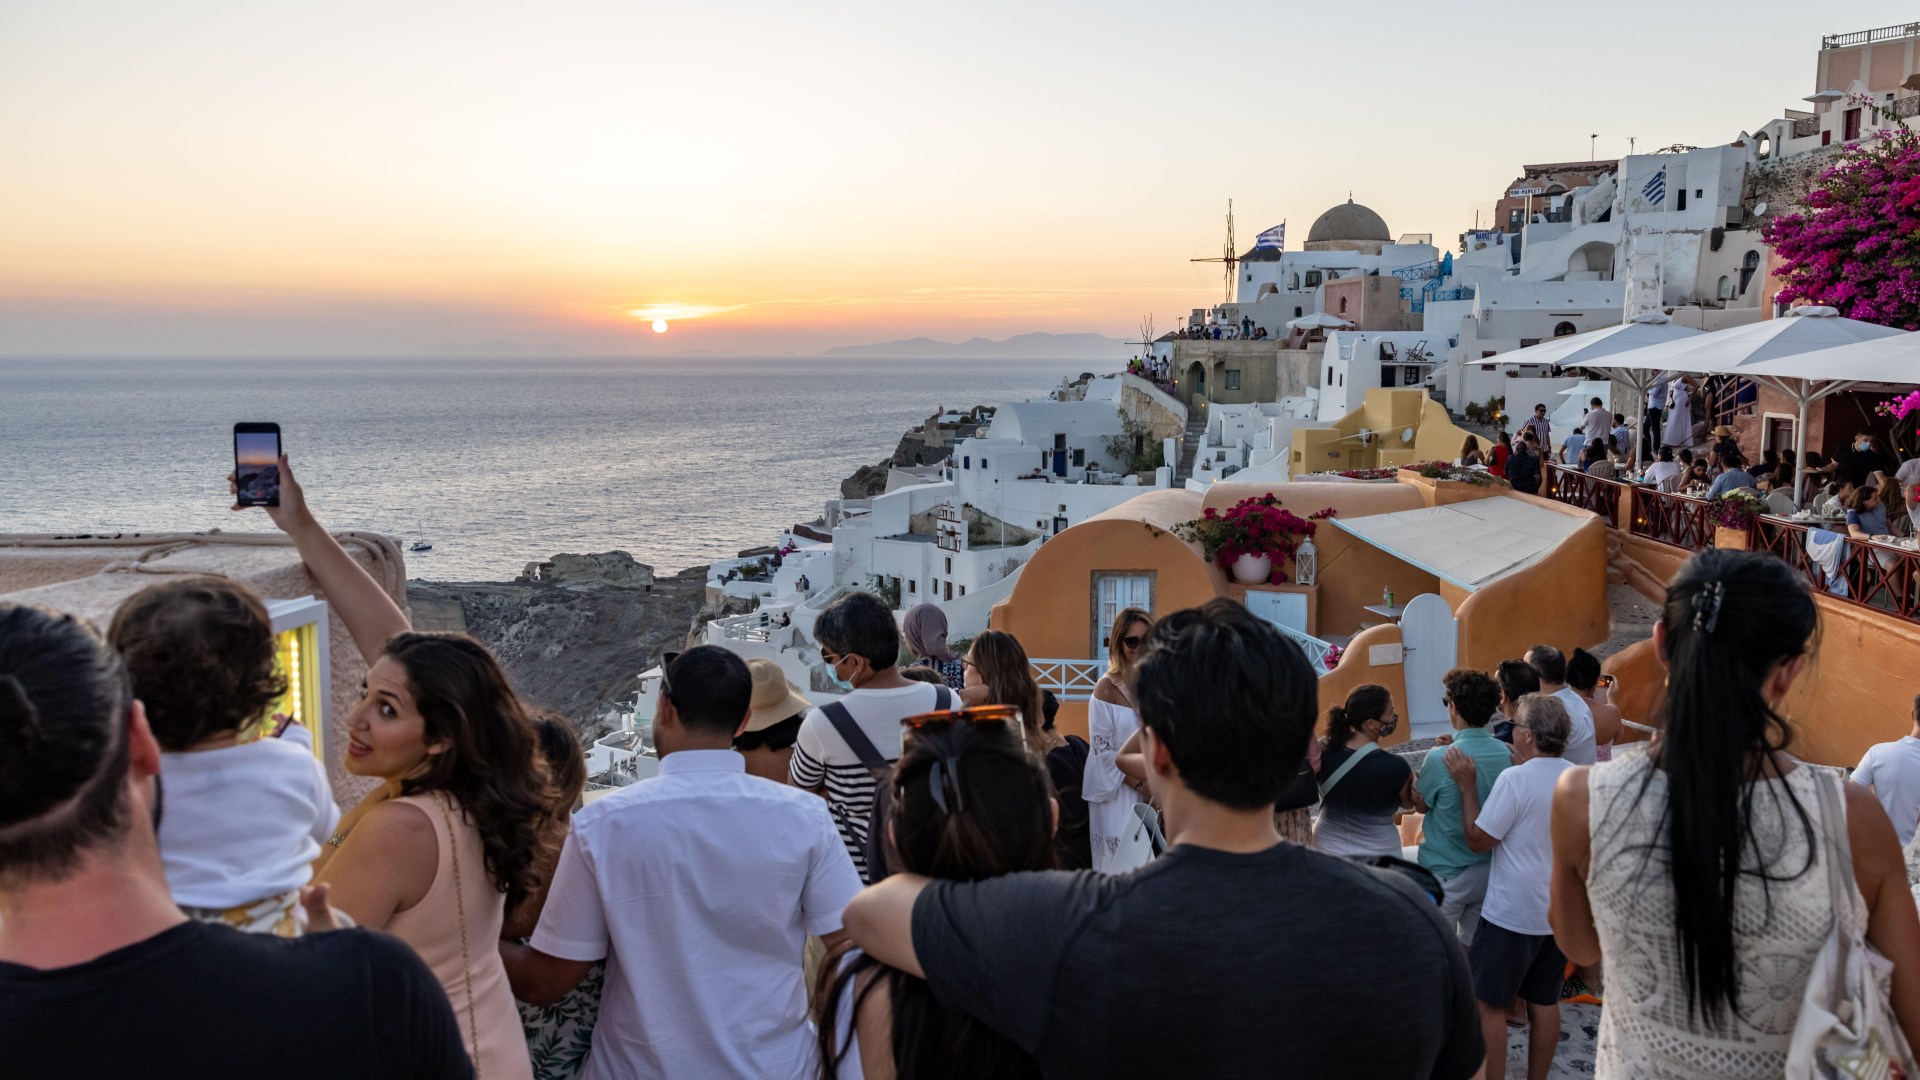 Tourists warned to avoid popular holiday destination this summer – with overcrowding and water shortages predicted [Video]